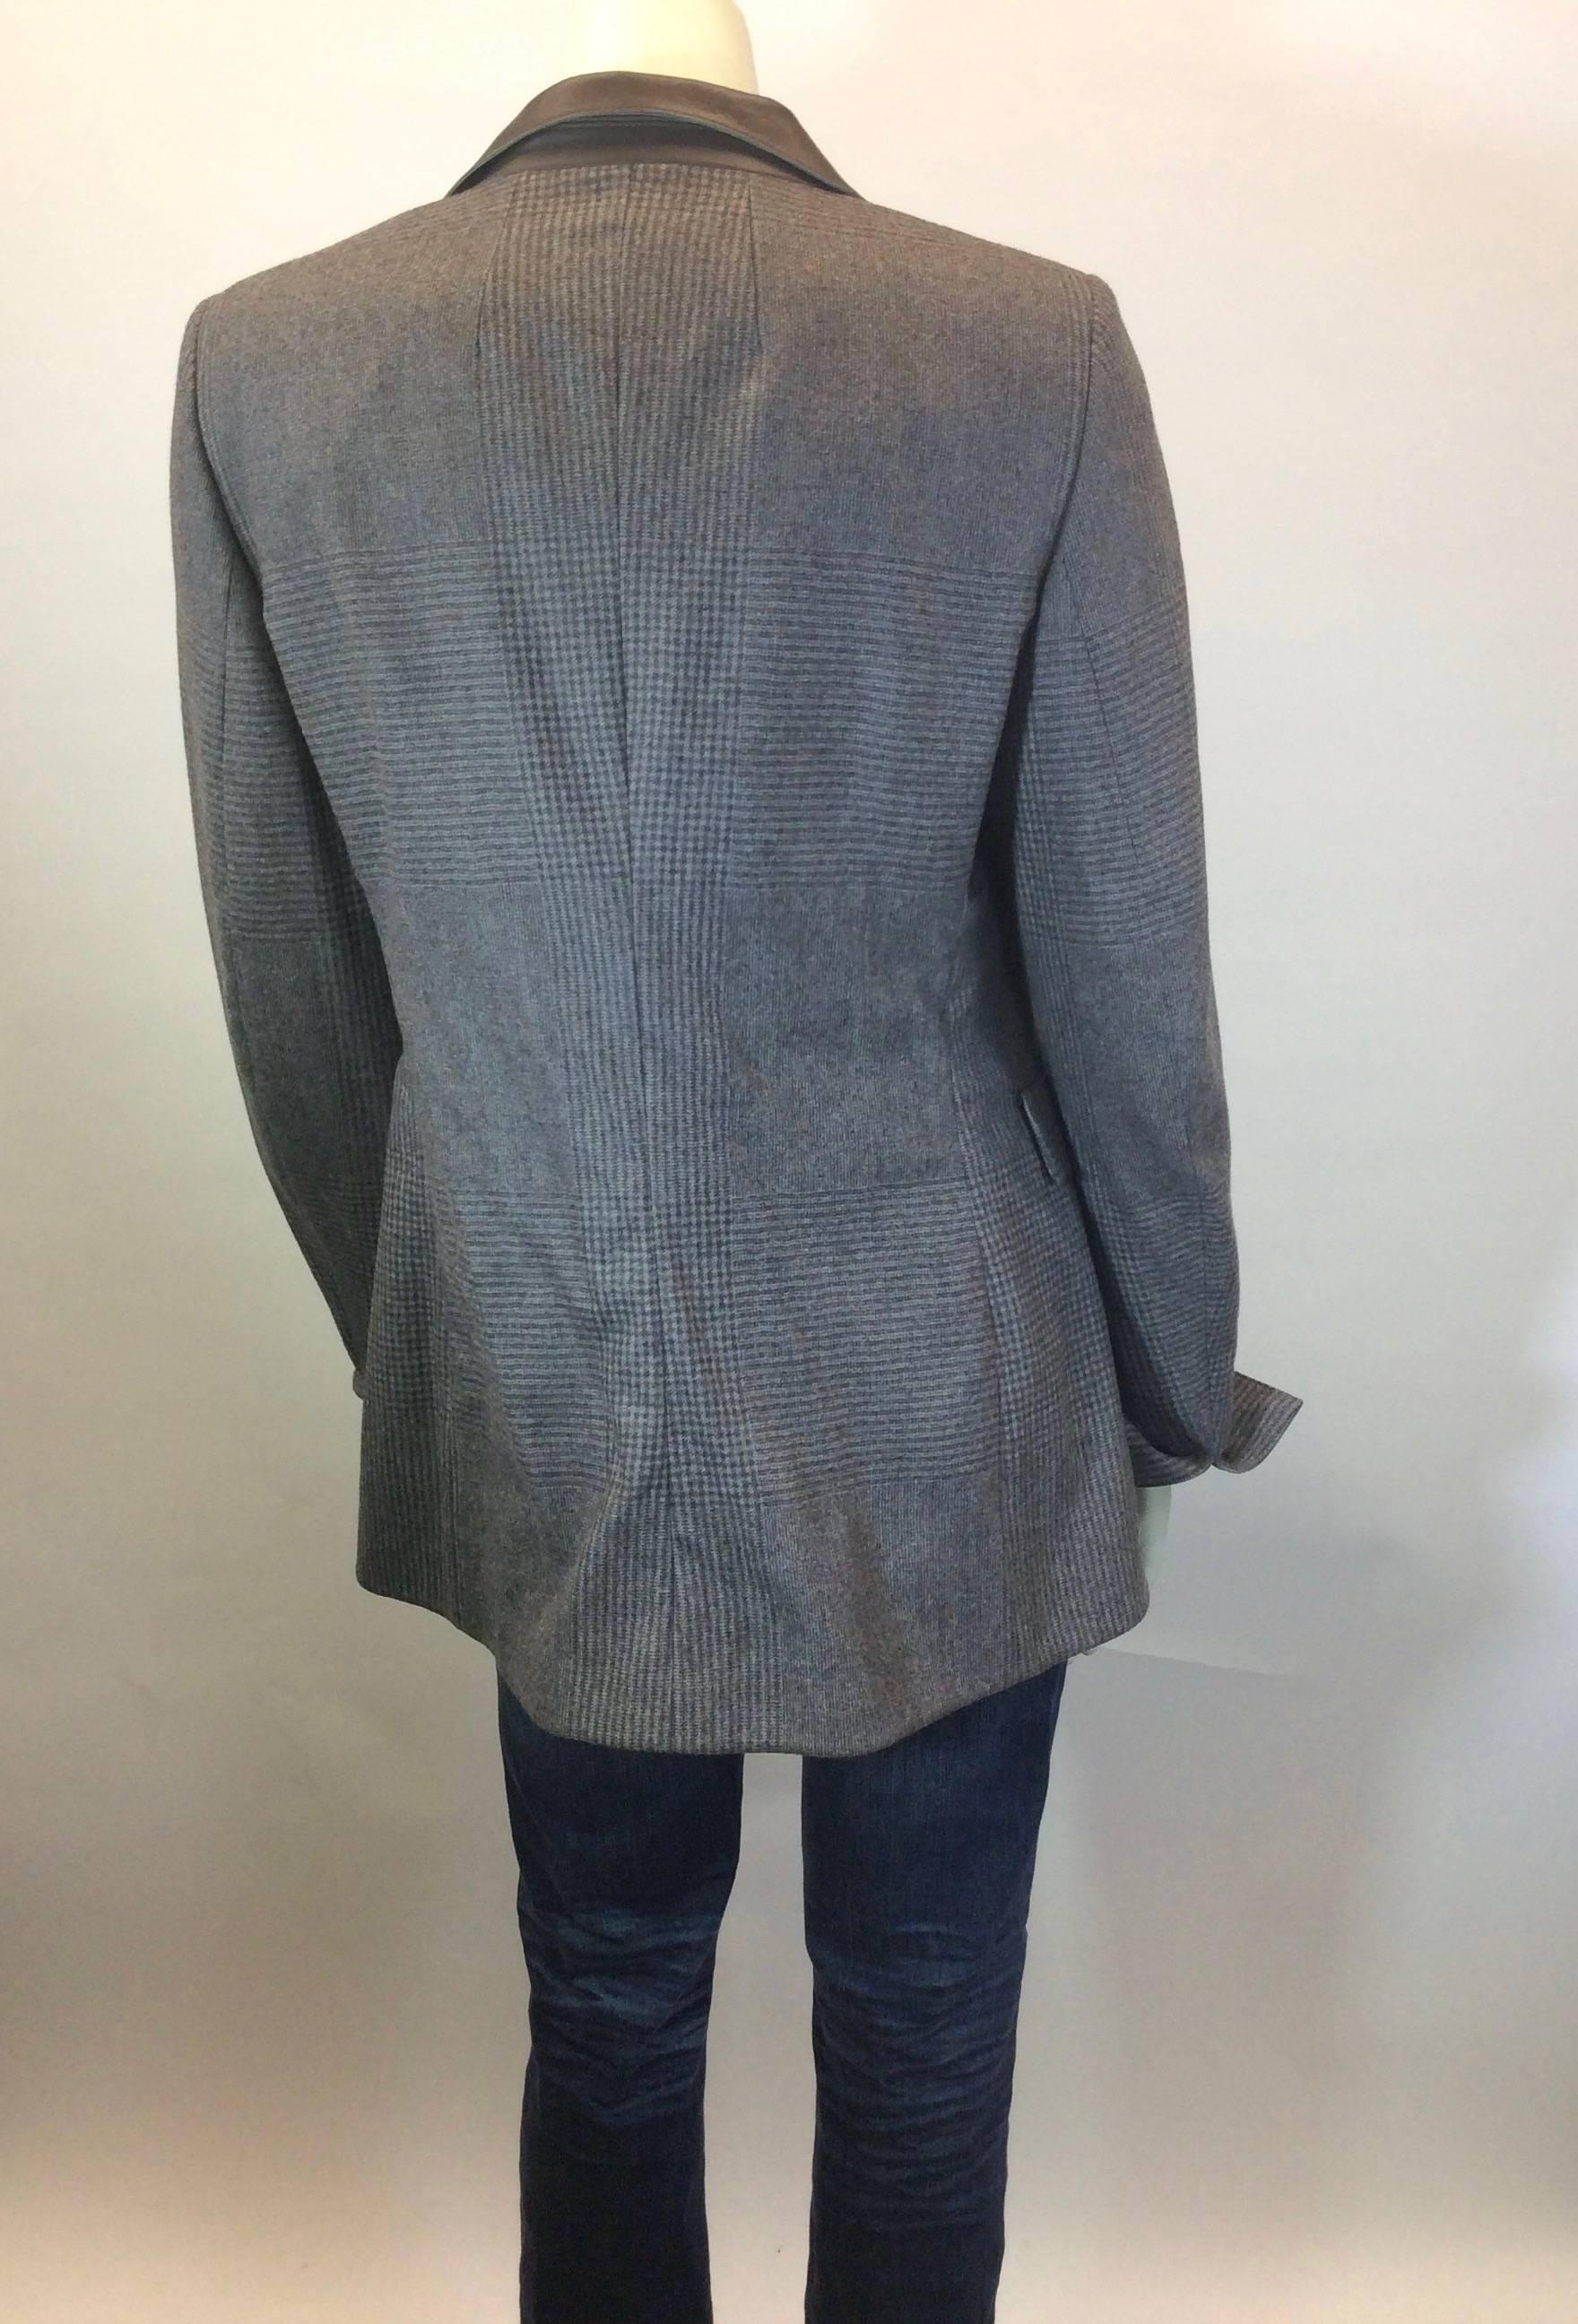 Akris Brown/Grey Wool Plaid Jacket In Excellent Condition For Sale In Narberth, PA